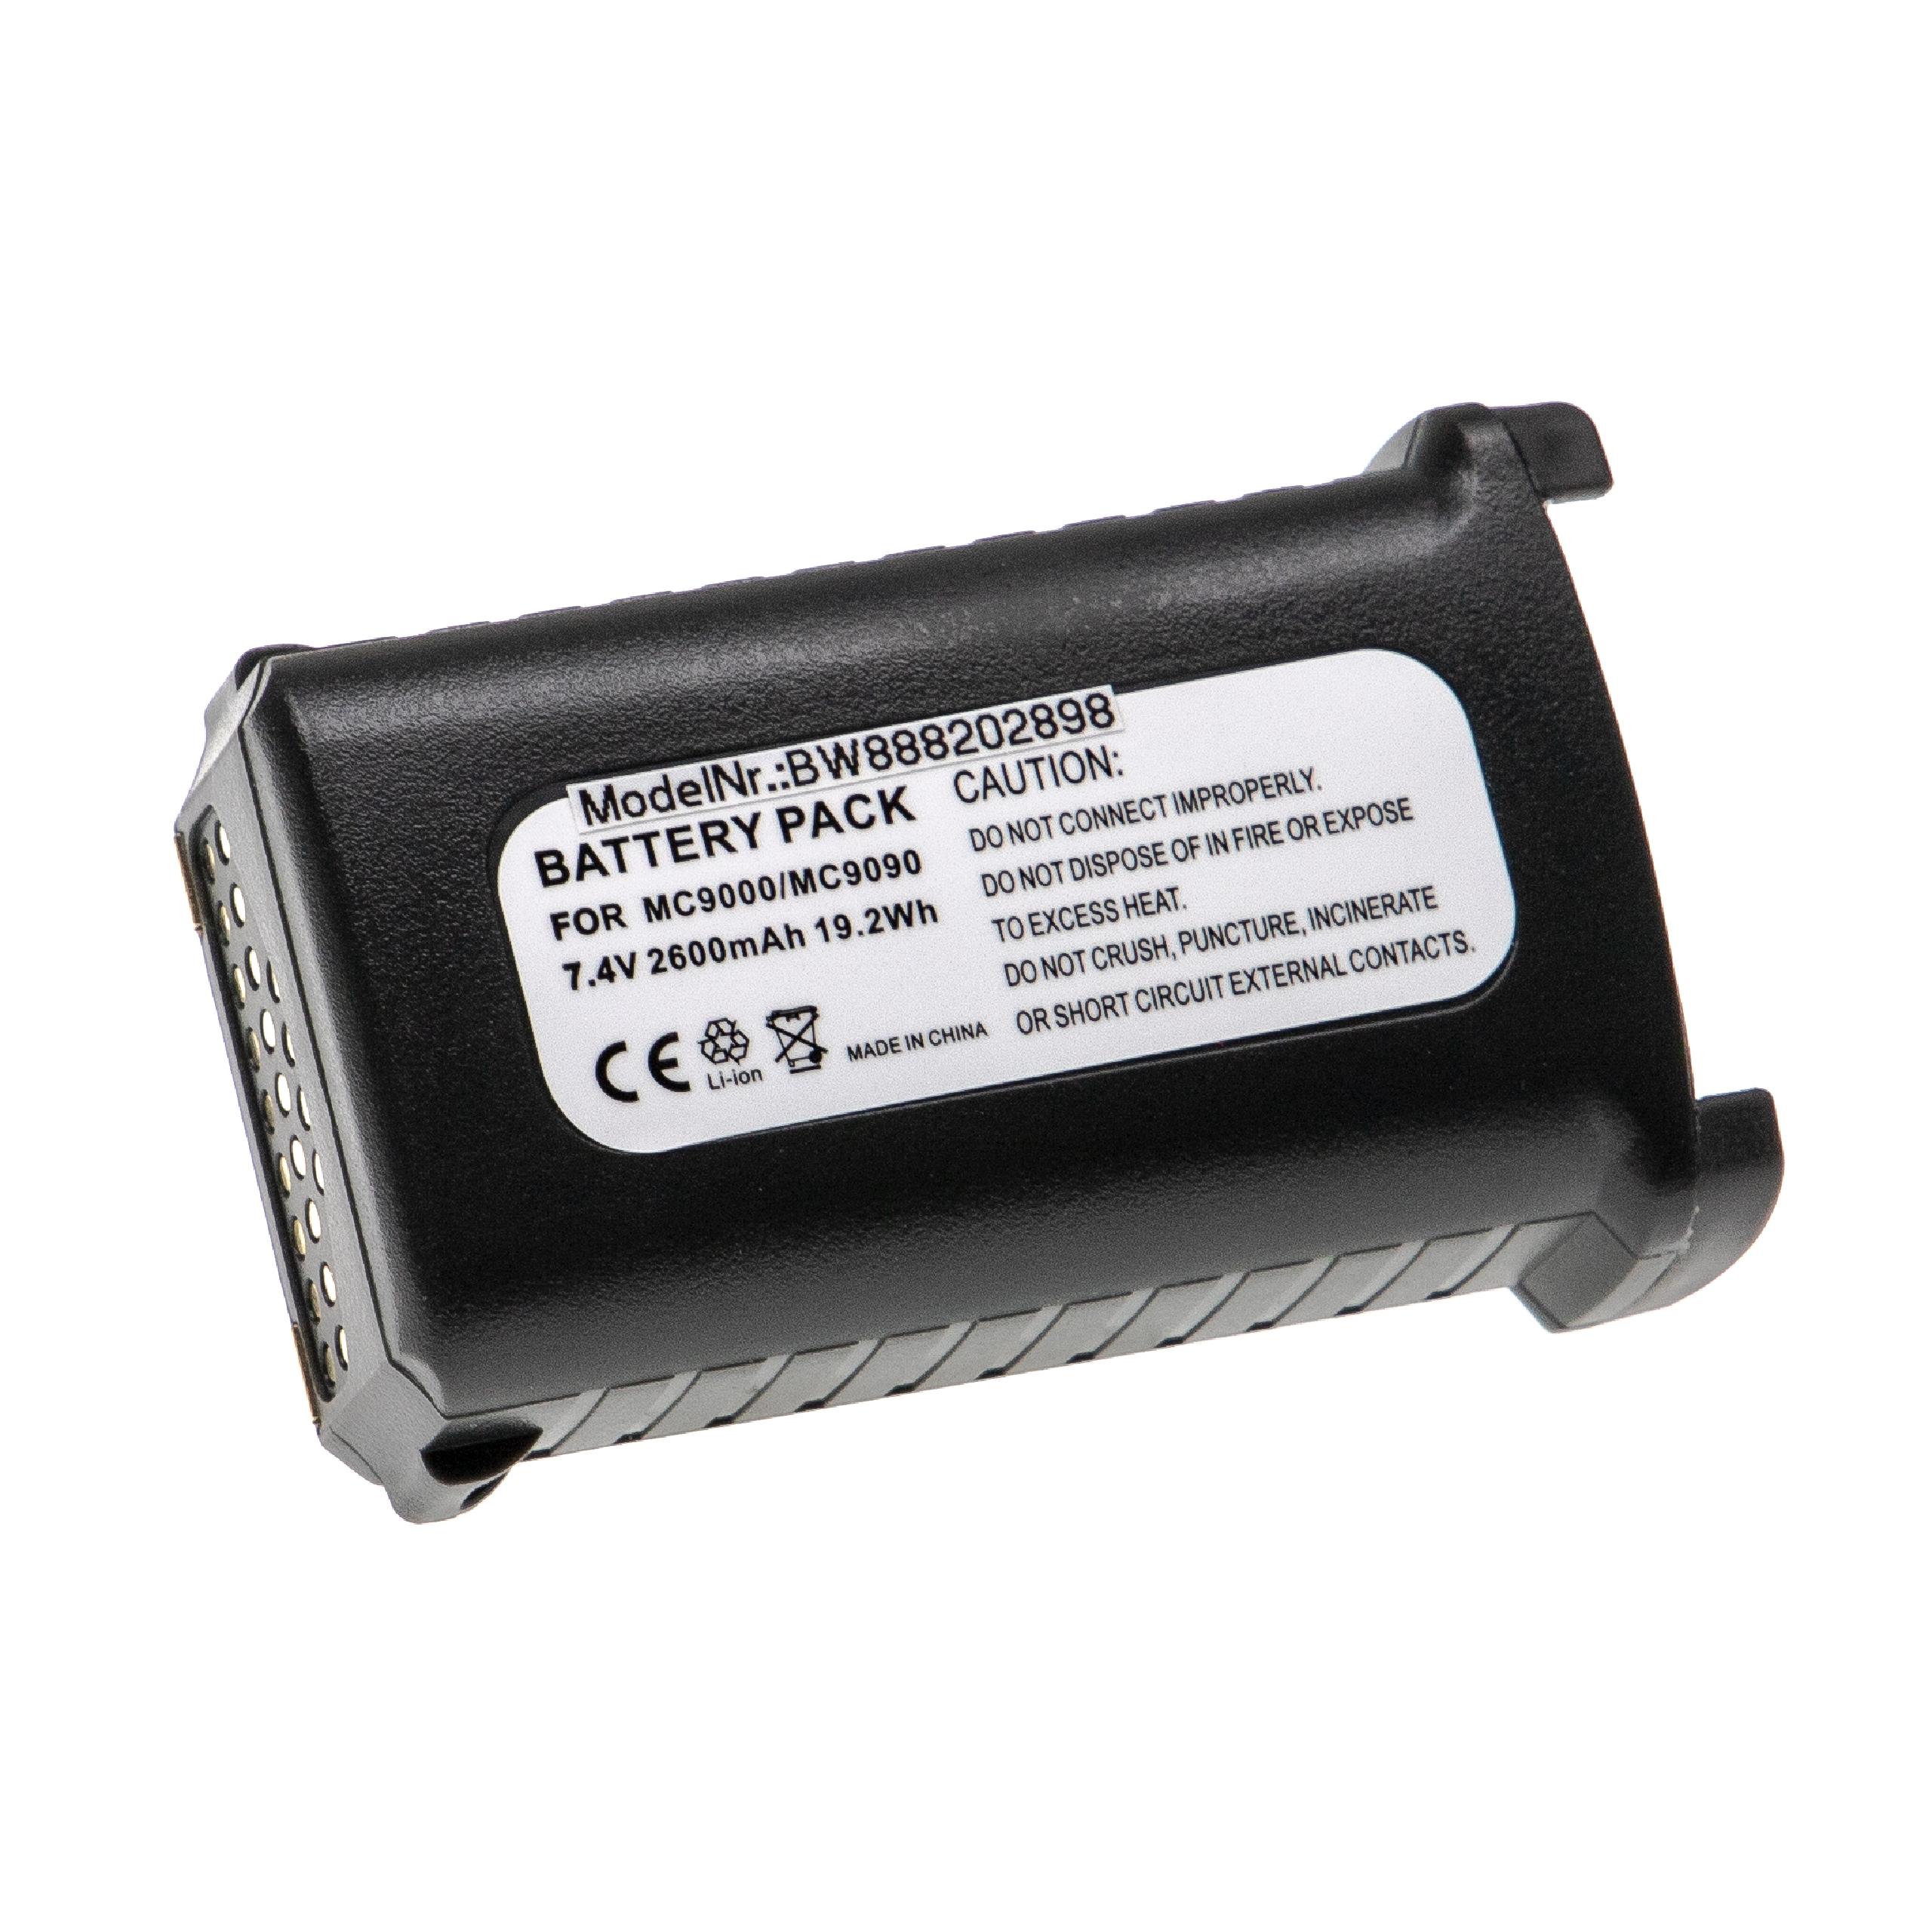 Handheld Computer Battery Replacement for Symbol 21-65587-02, 21-65587-01, 21-61261-01 - 2600mAh, 7.4V